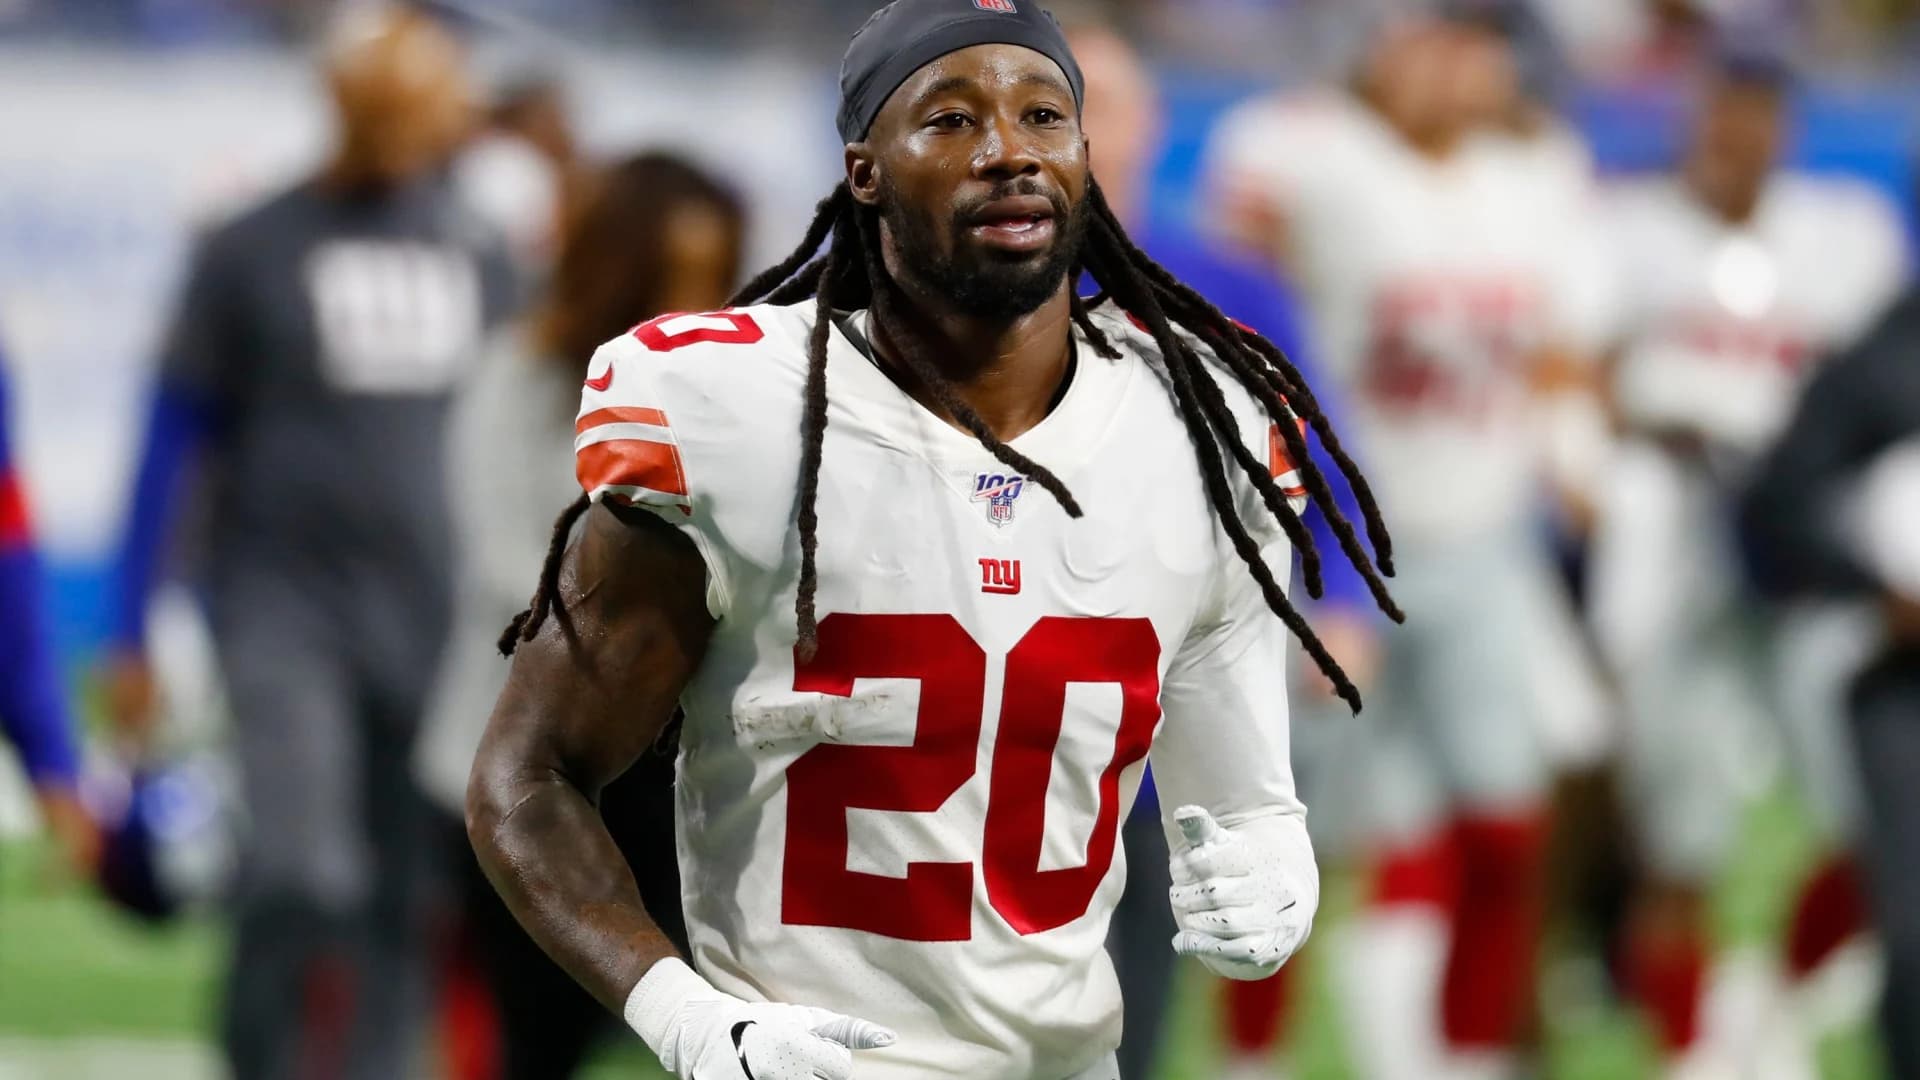 Giants waive injured Janoris Jenkins after his Twitter rant